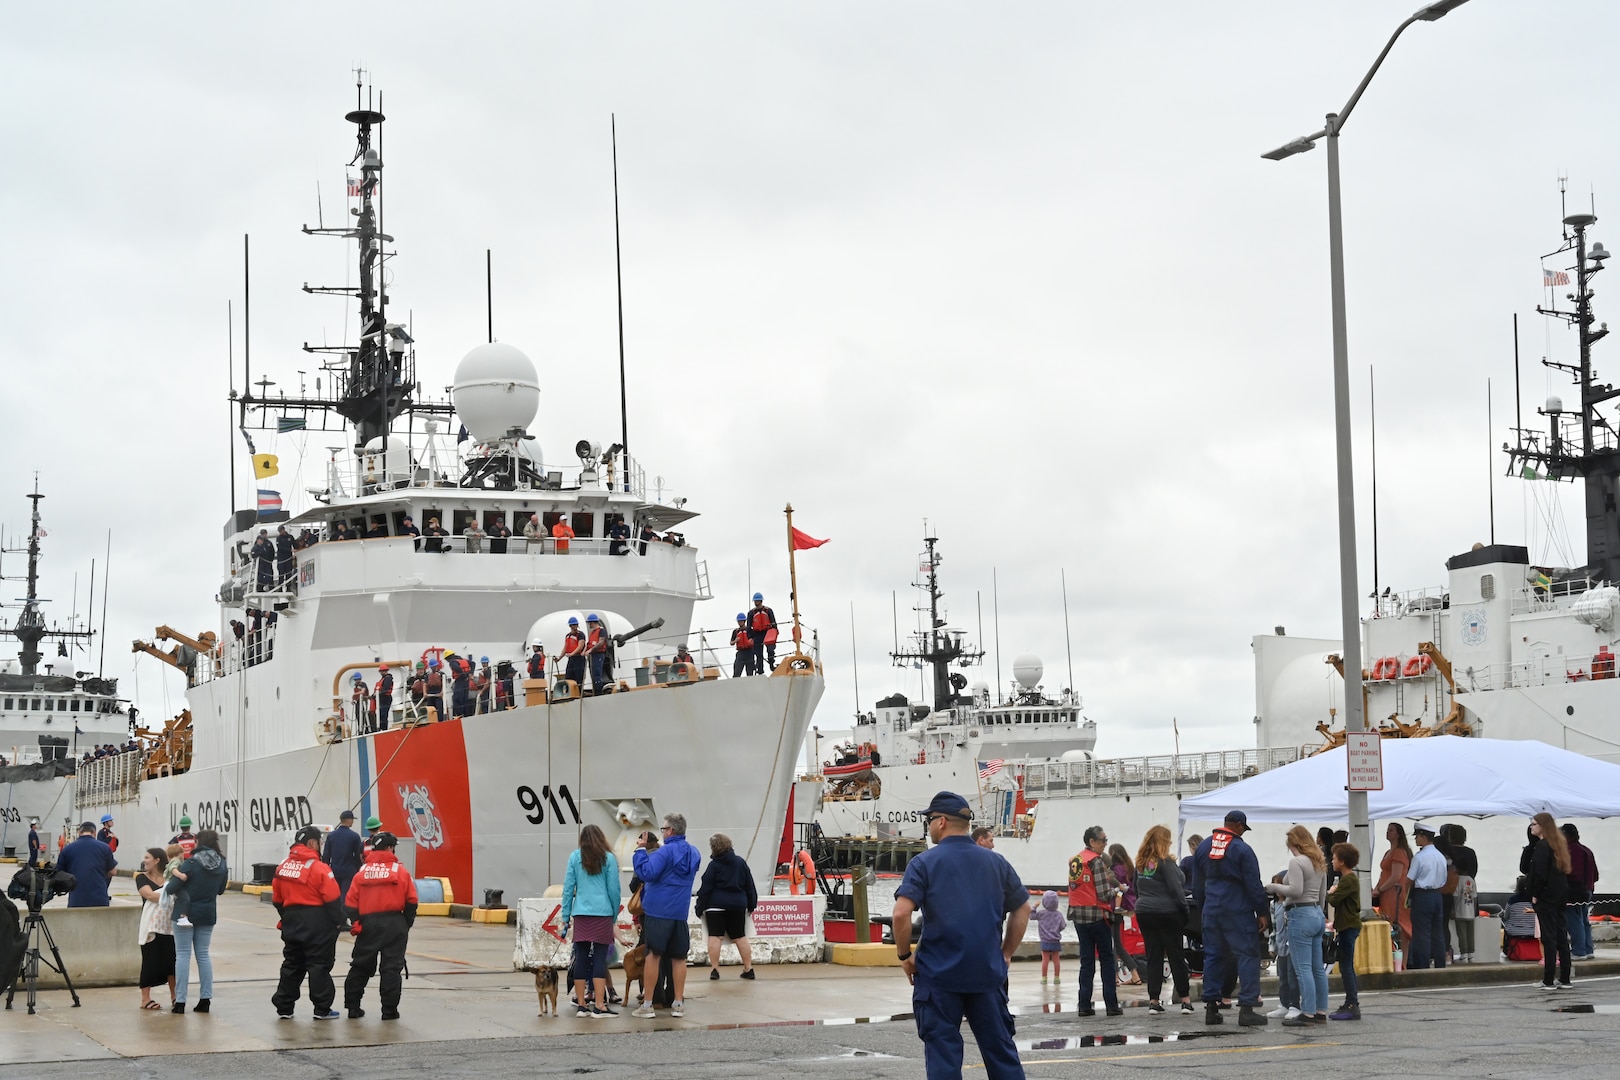 A crowd waits to greet U.S. Coast Guard Cutter Forward's (WMEC 911) crew at the pier, Sept. 26, in Portsmouth, Virginia. Forward completed a two-and-a-half month-long patrol in the North Atlantic Ocean to support the Coast Guard Arctic Strategy and participate in the Canadian Armed Forces-led Operation Nanook 2023, an annual military exercise conducted to strengthen shared maritime objectives in the high northern latitudes. (U.S. Coast Guard photo by Petty Officer 2nd Class Brandon Hillard)